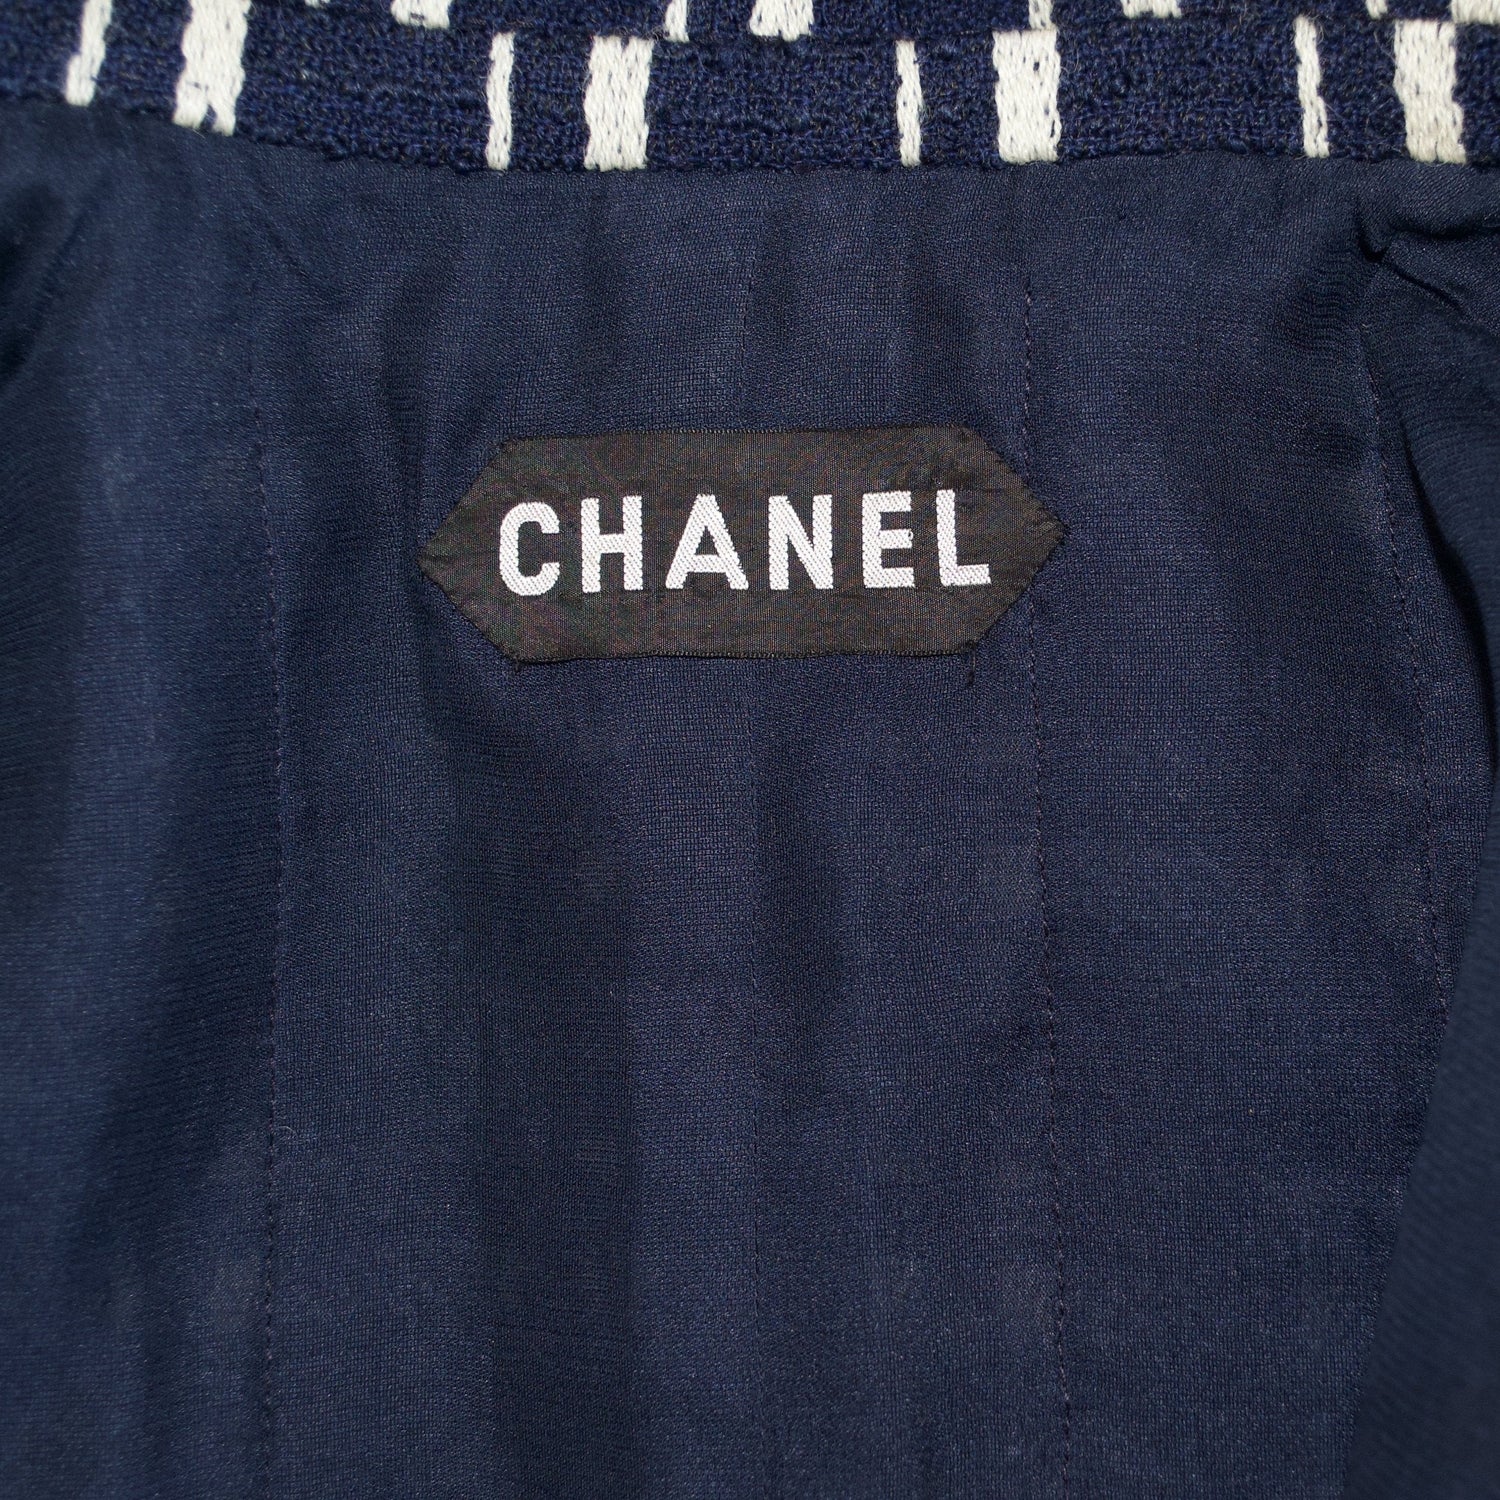 Lysis vintage Chanel skirt suit - M - 1970s